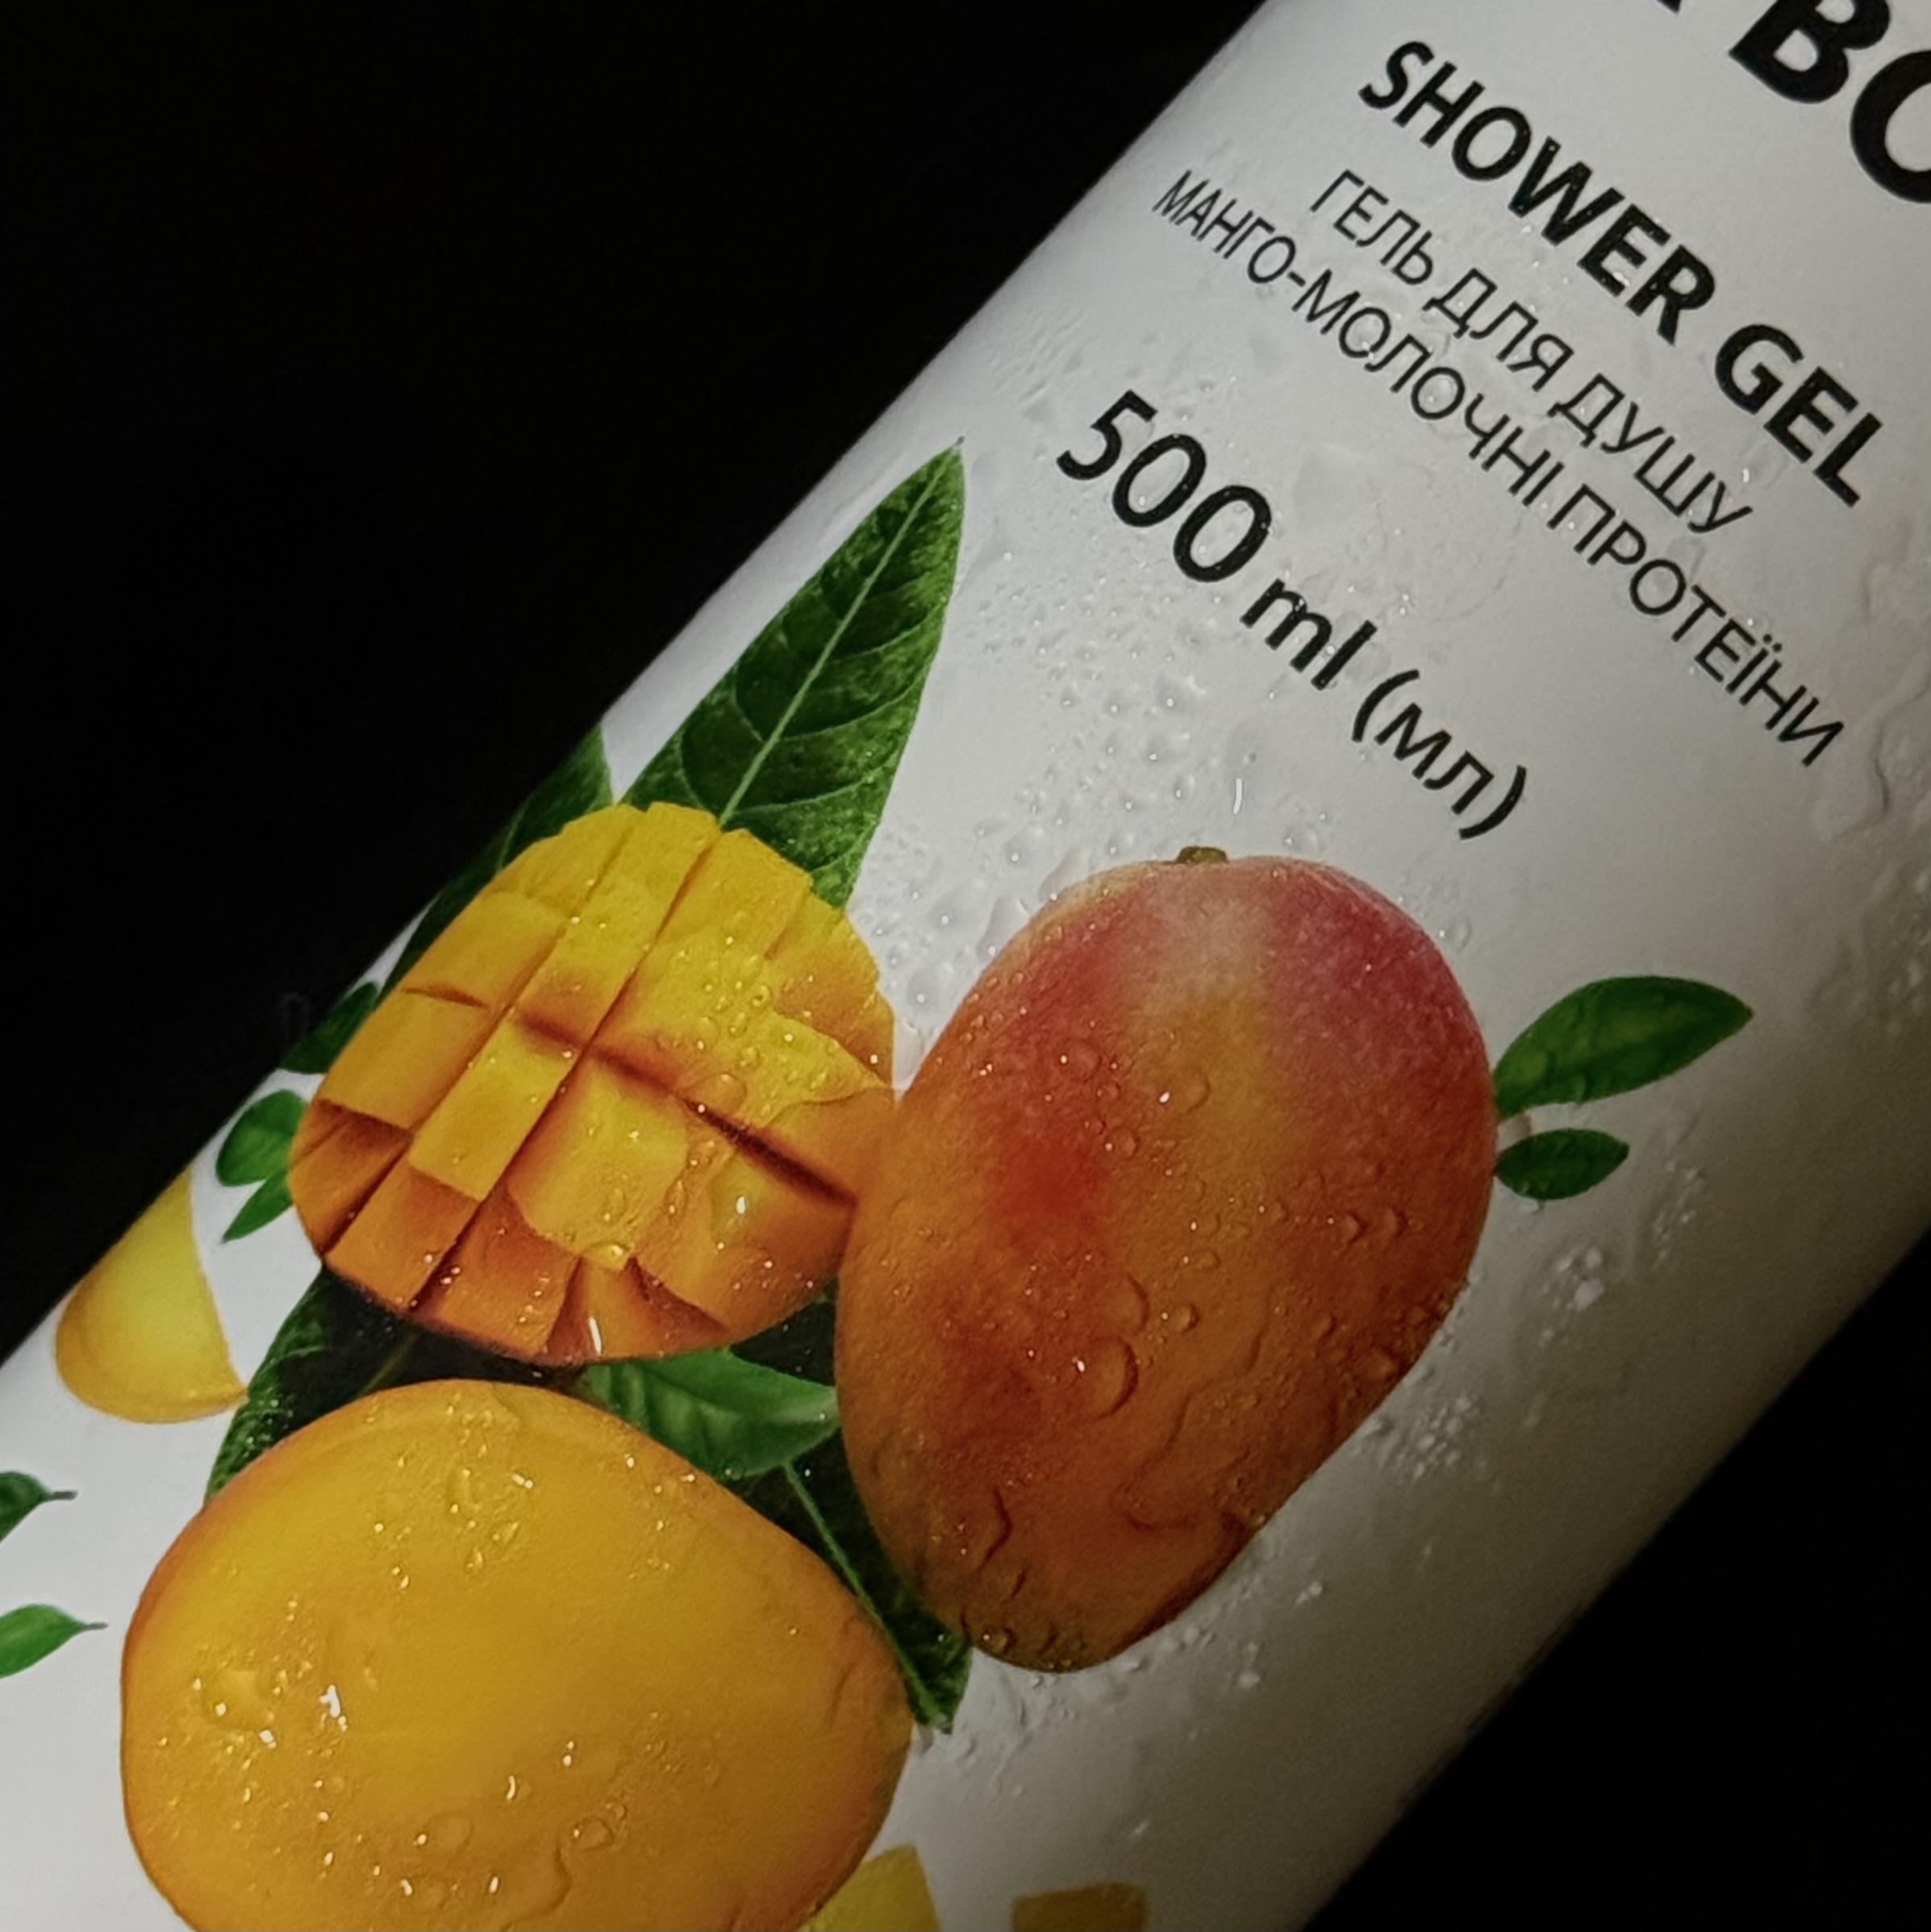 Tink Superfood For Body Shower Gel